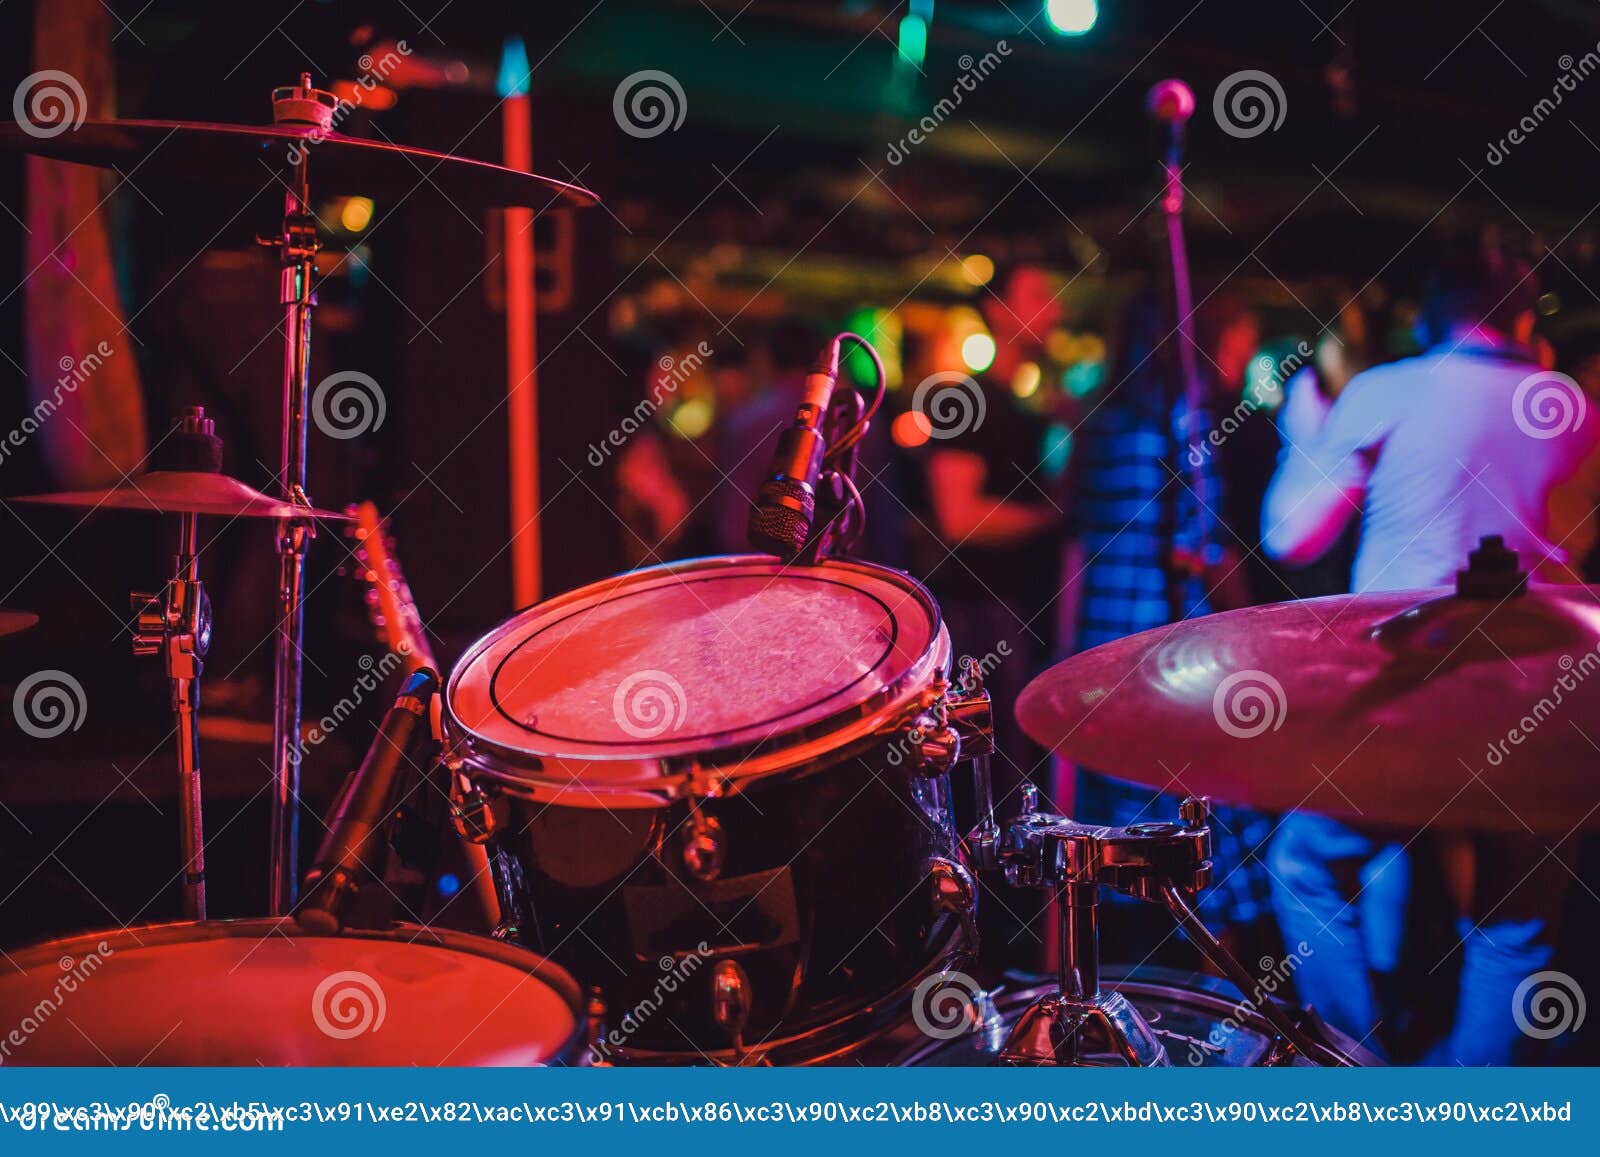 Drum Kit on Stage in the Spotlight Color. Stock Image - Image of modern ...